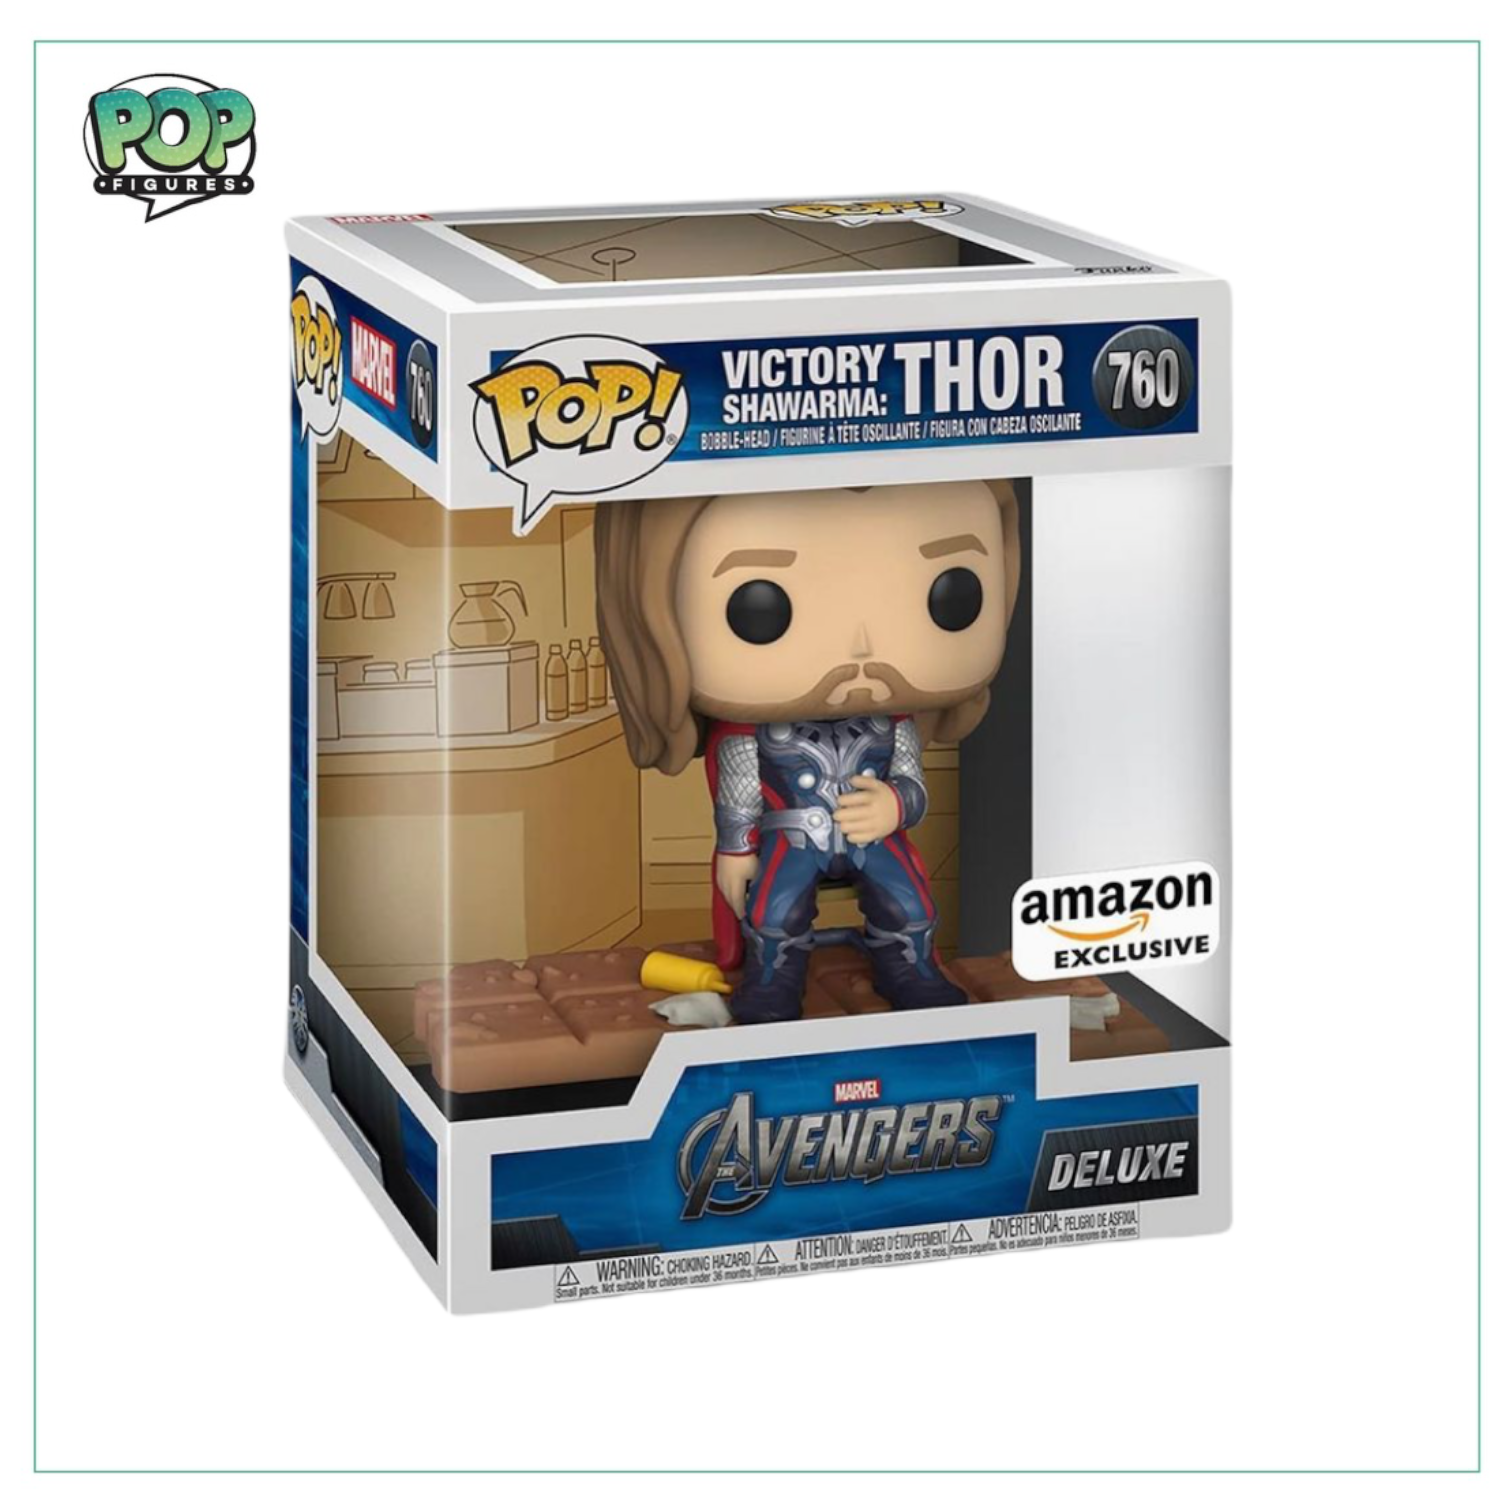 Victory Shawarma: Thor #760 Deluxe Funko Pop! Avengers - Amazon Exclusive - Angry Cat